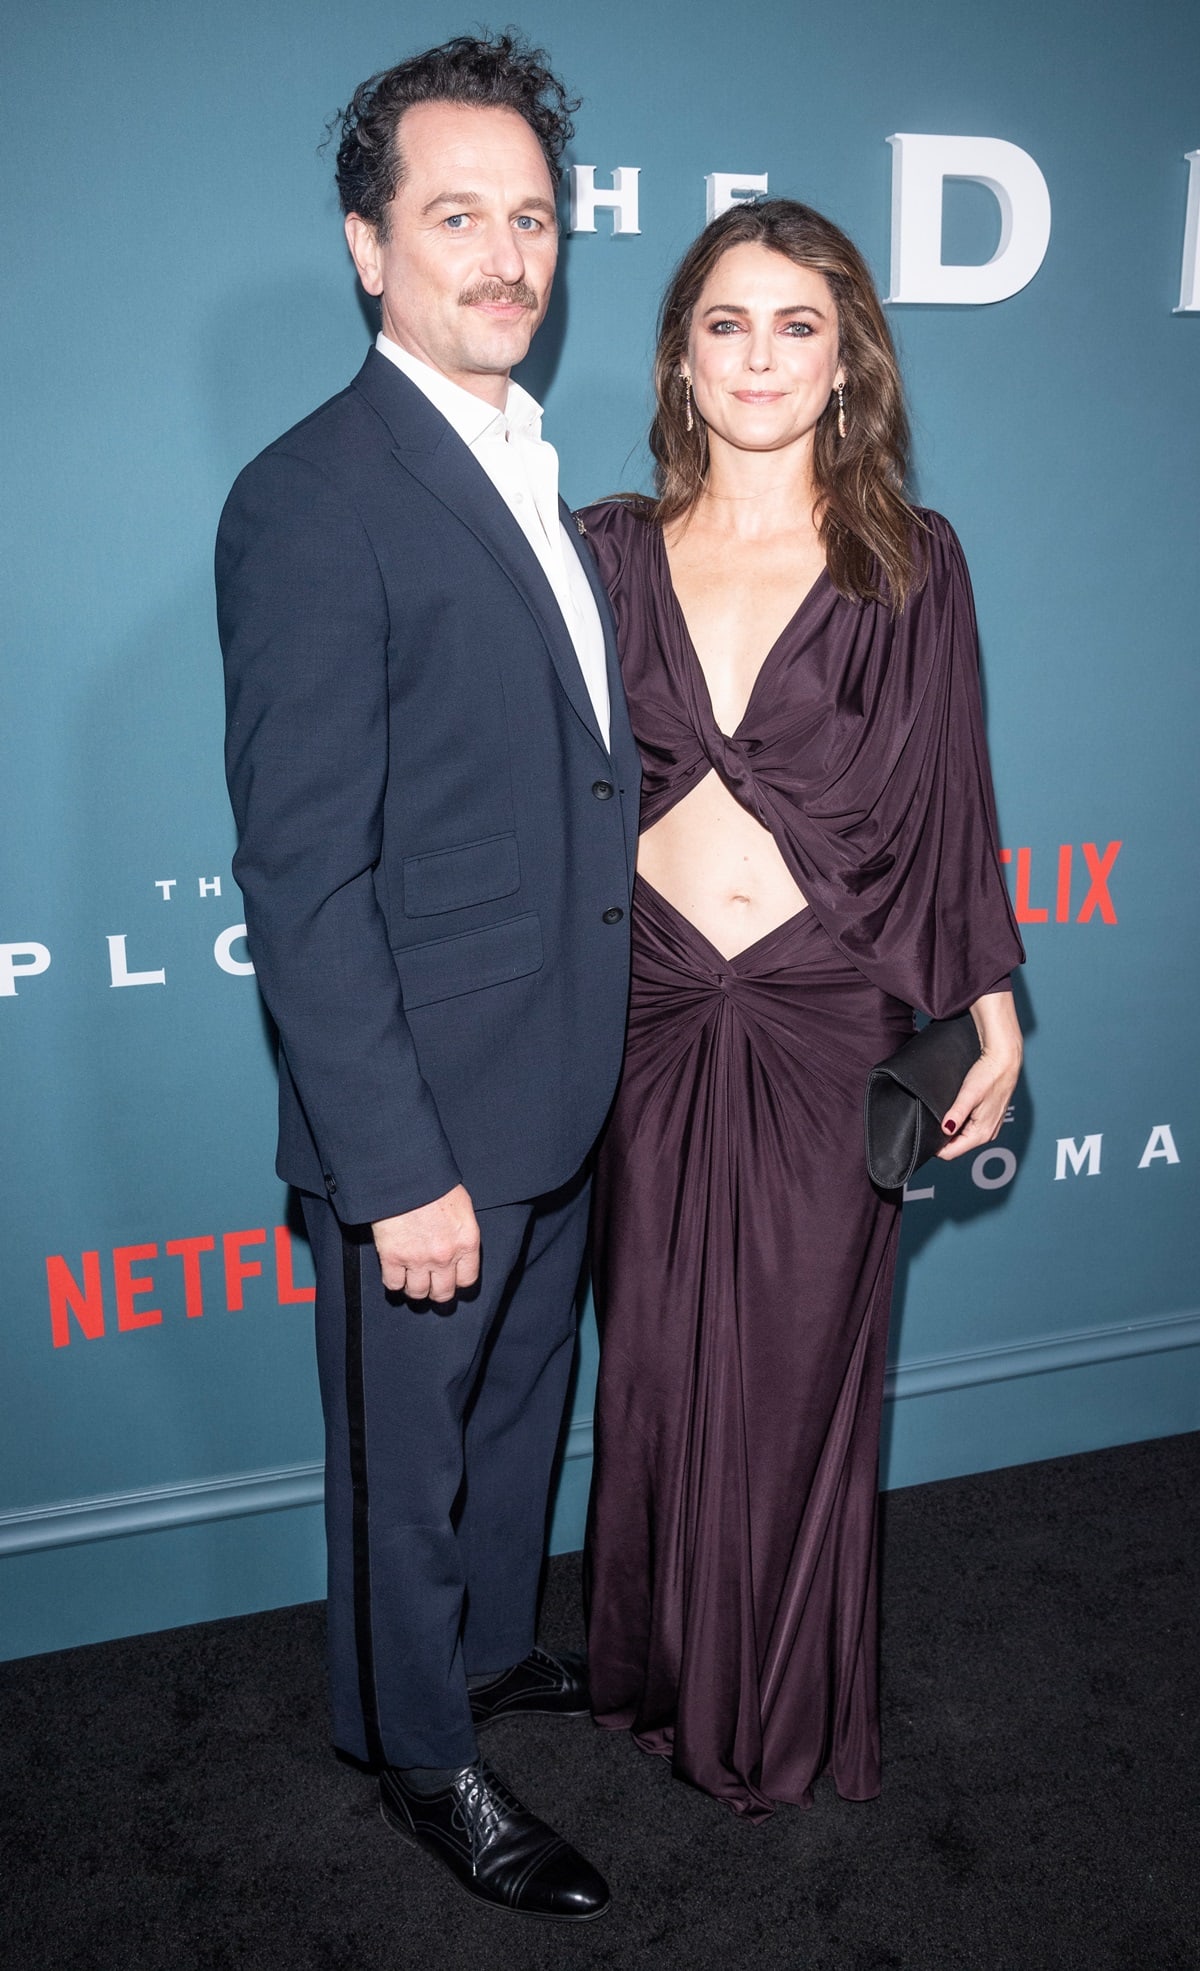 Matthew Rhys is taller than his wife, Keri Russell. Matthew Rhys stands at 5 feet 10.5 inches (179.1 cm) tall, while Keri Russell is 5 feet 4 inches (162.6 cm) tall